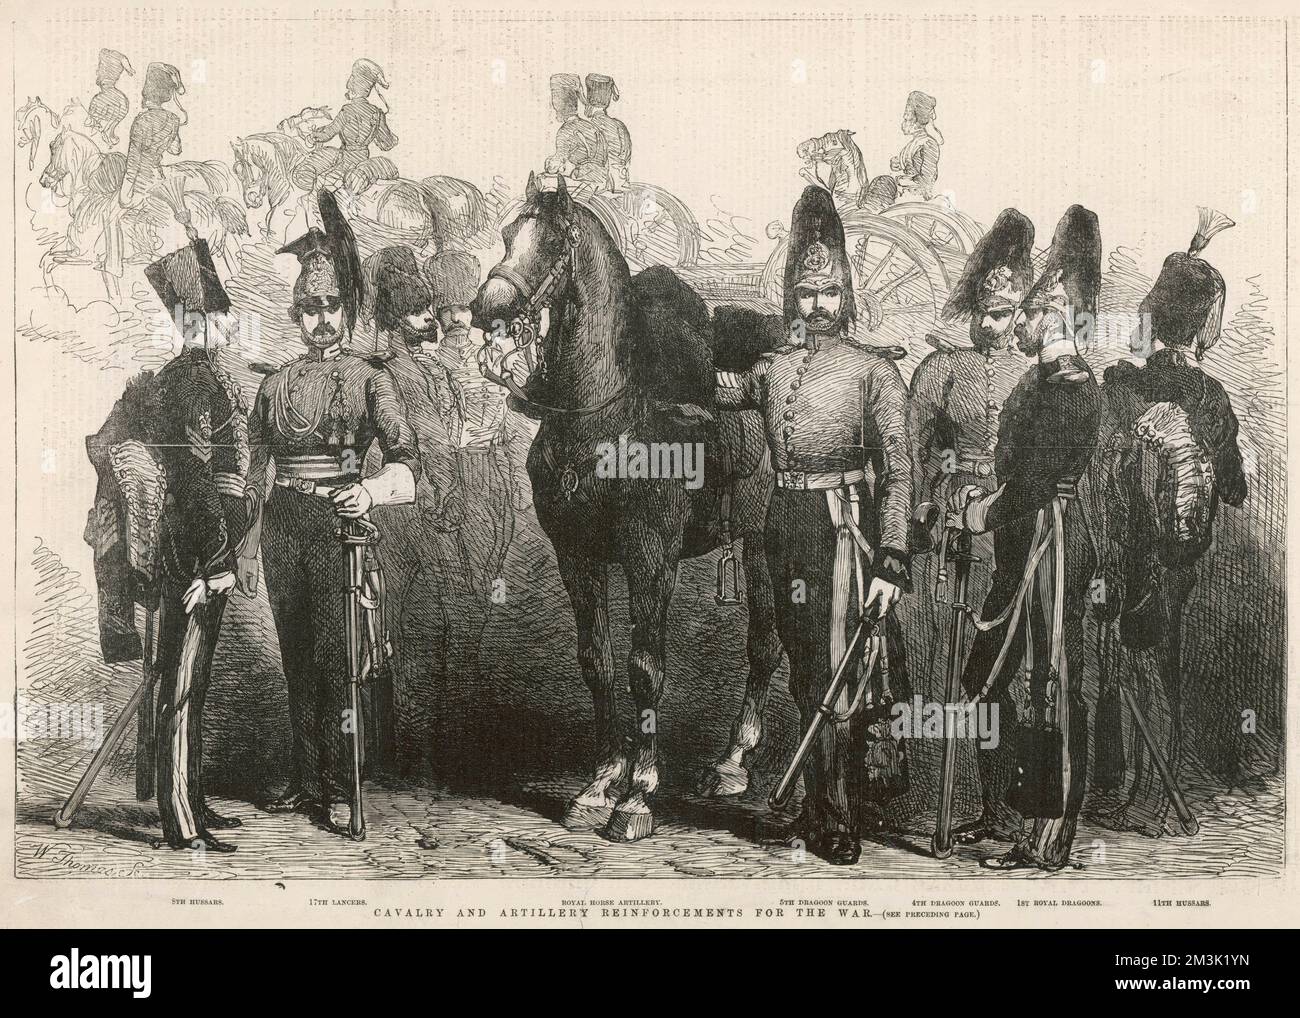 Officers of the 8th Hussars, 17th Lancers, Royal Horse Artillery, 5th Dragoon Guards, 4th Dragoon Guards, 1st Royal Dragoons and 11th Hussars in their dress uniforms, with plumed helmets, 1854.   At the time, these units were heading, as reinforcements, for the Crimea.  1855 Stock Photo